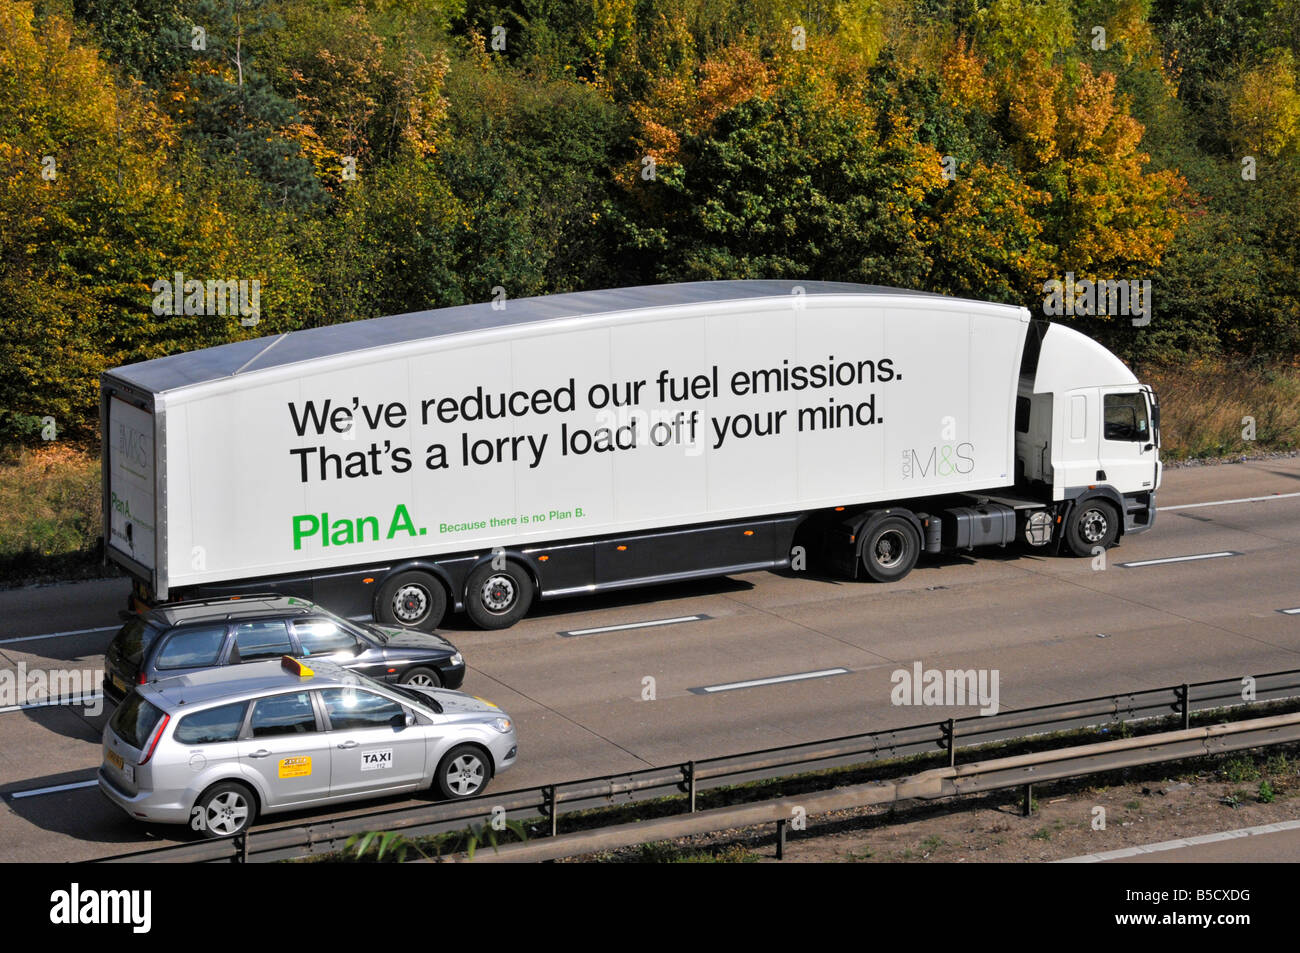 M25 motorway' Marks and Spencer lorry with fuel emission and plan A slogan cars overtaking Stock Photo